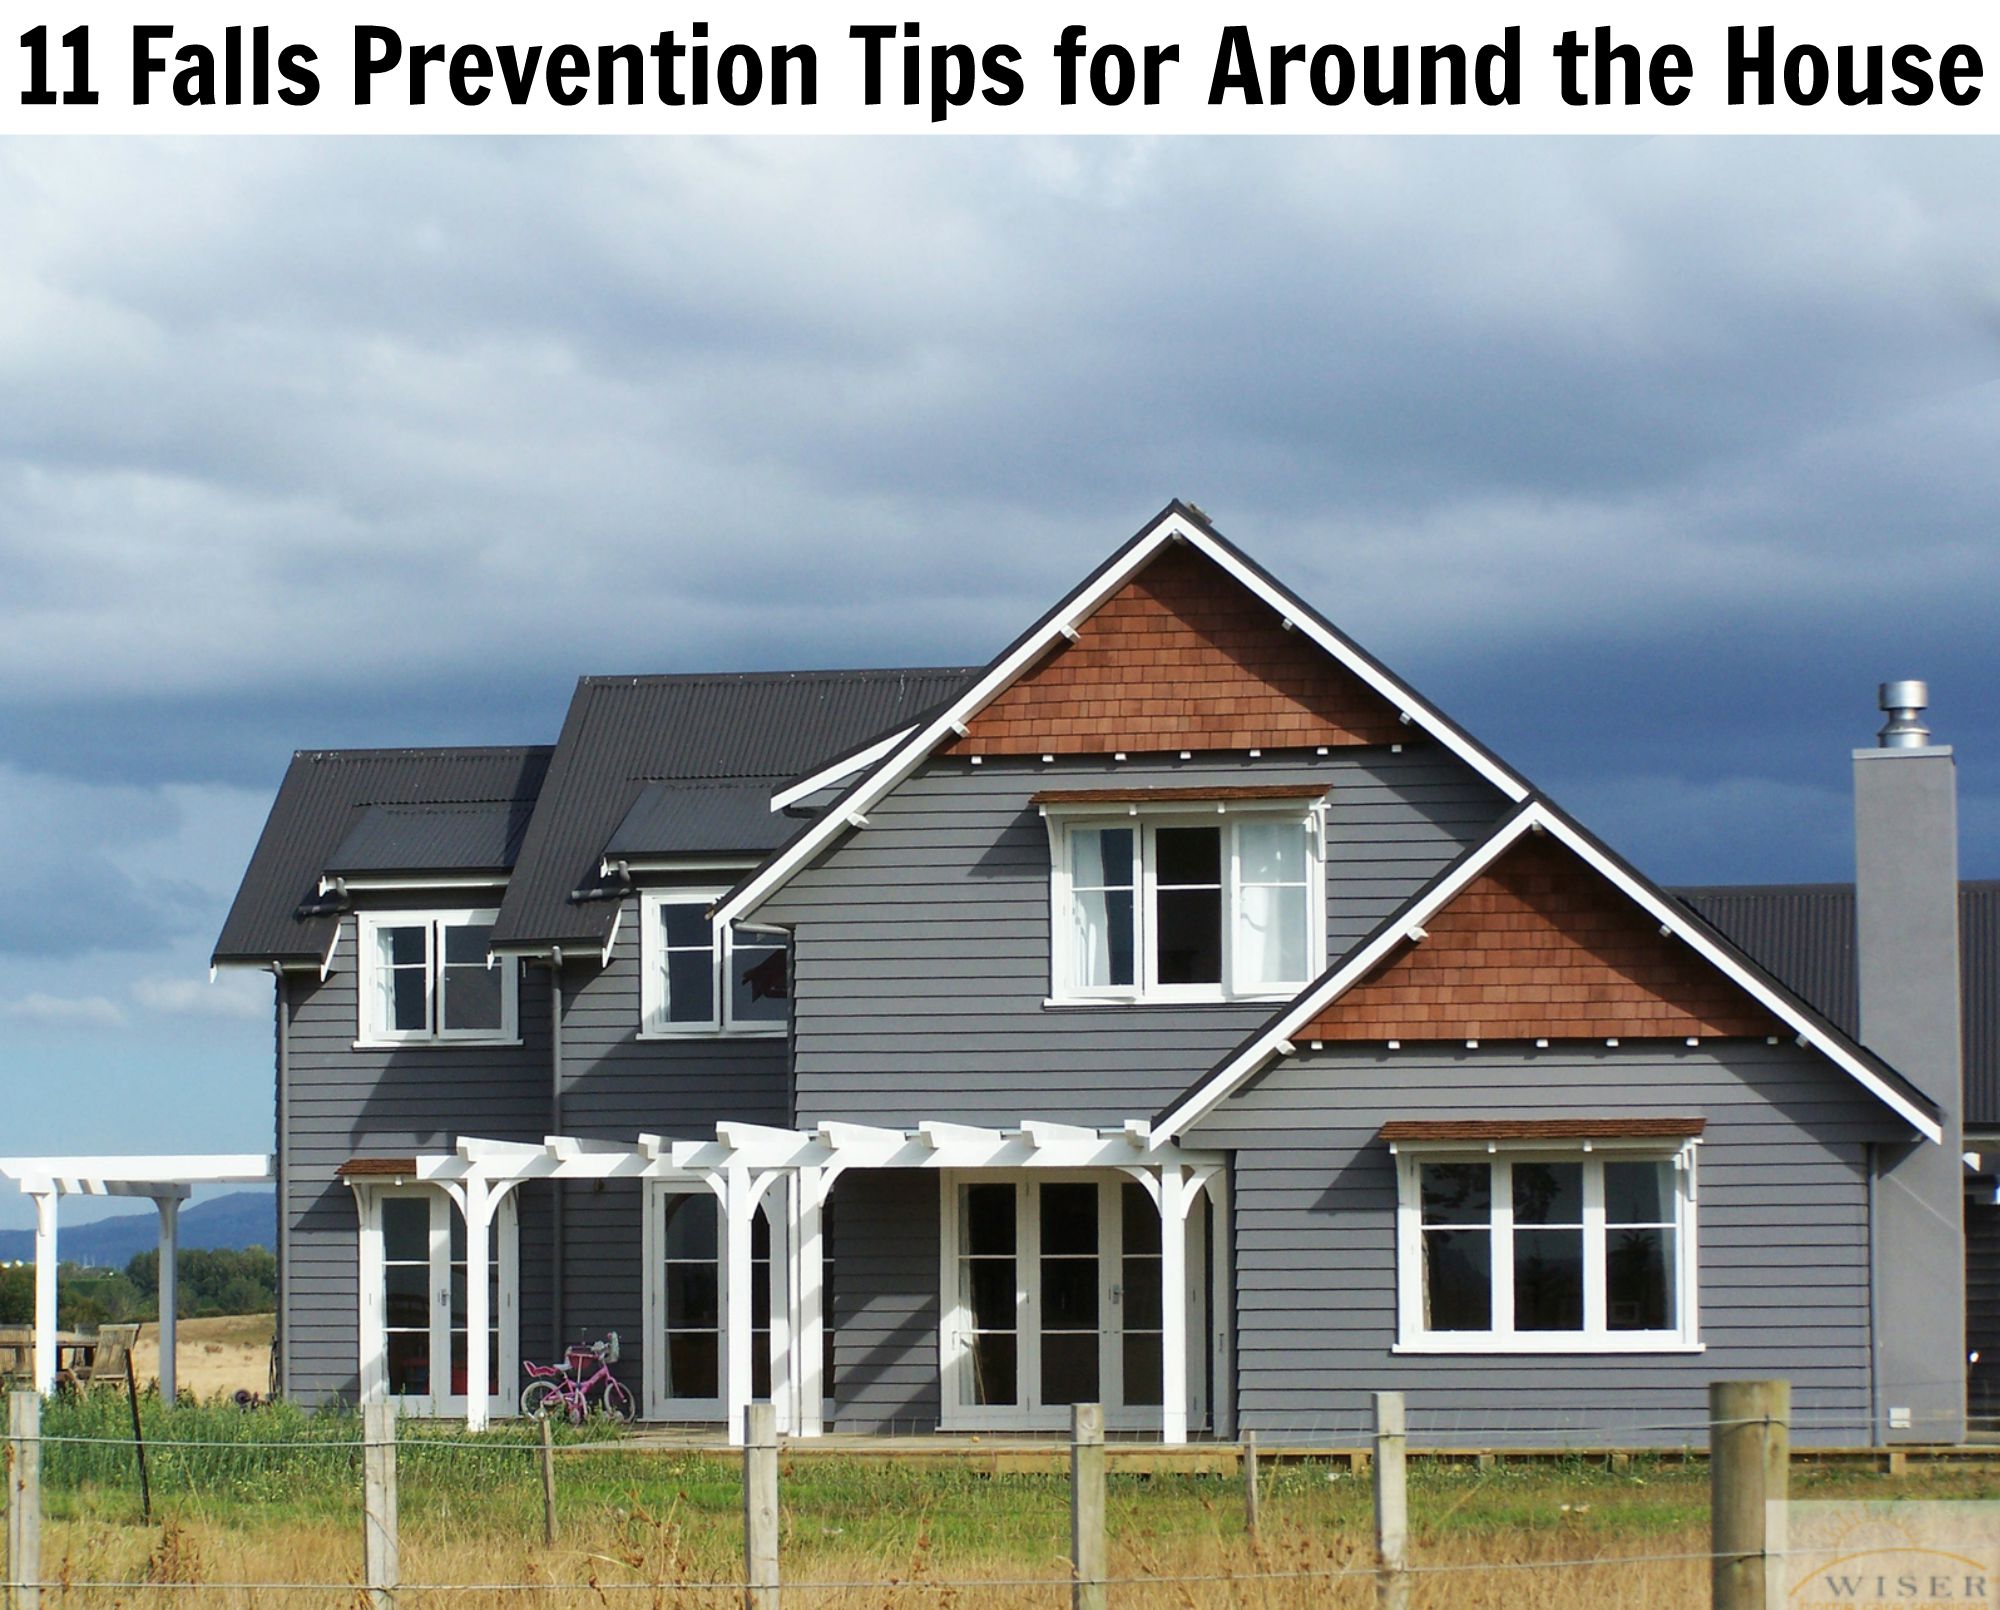 September is national falls prevention awareness month. A majority of falls take place in the comfort and security of home these tips will come in handy.